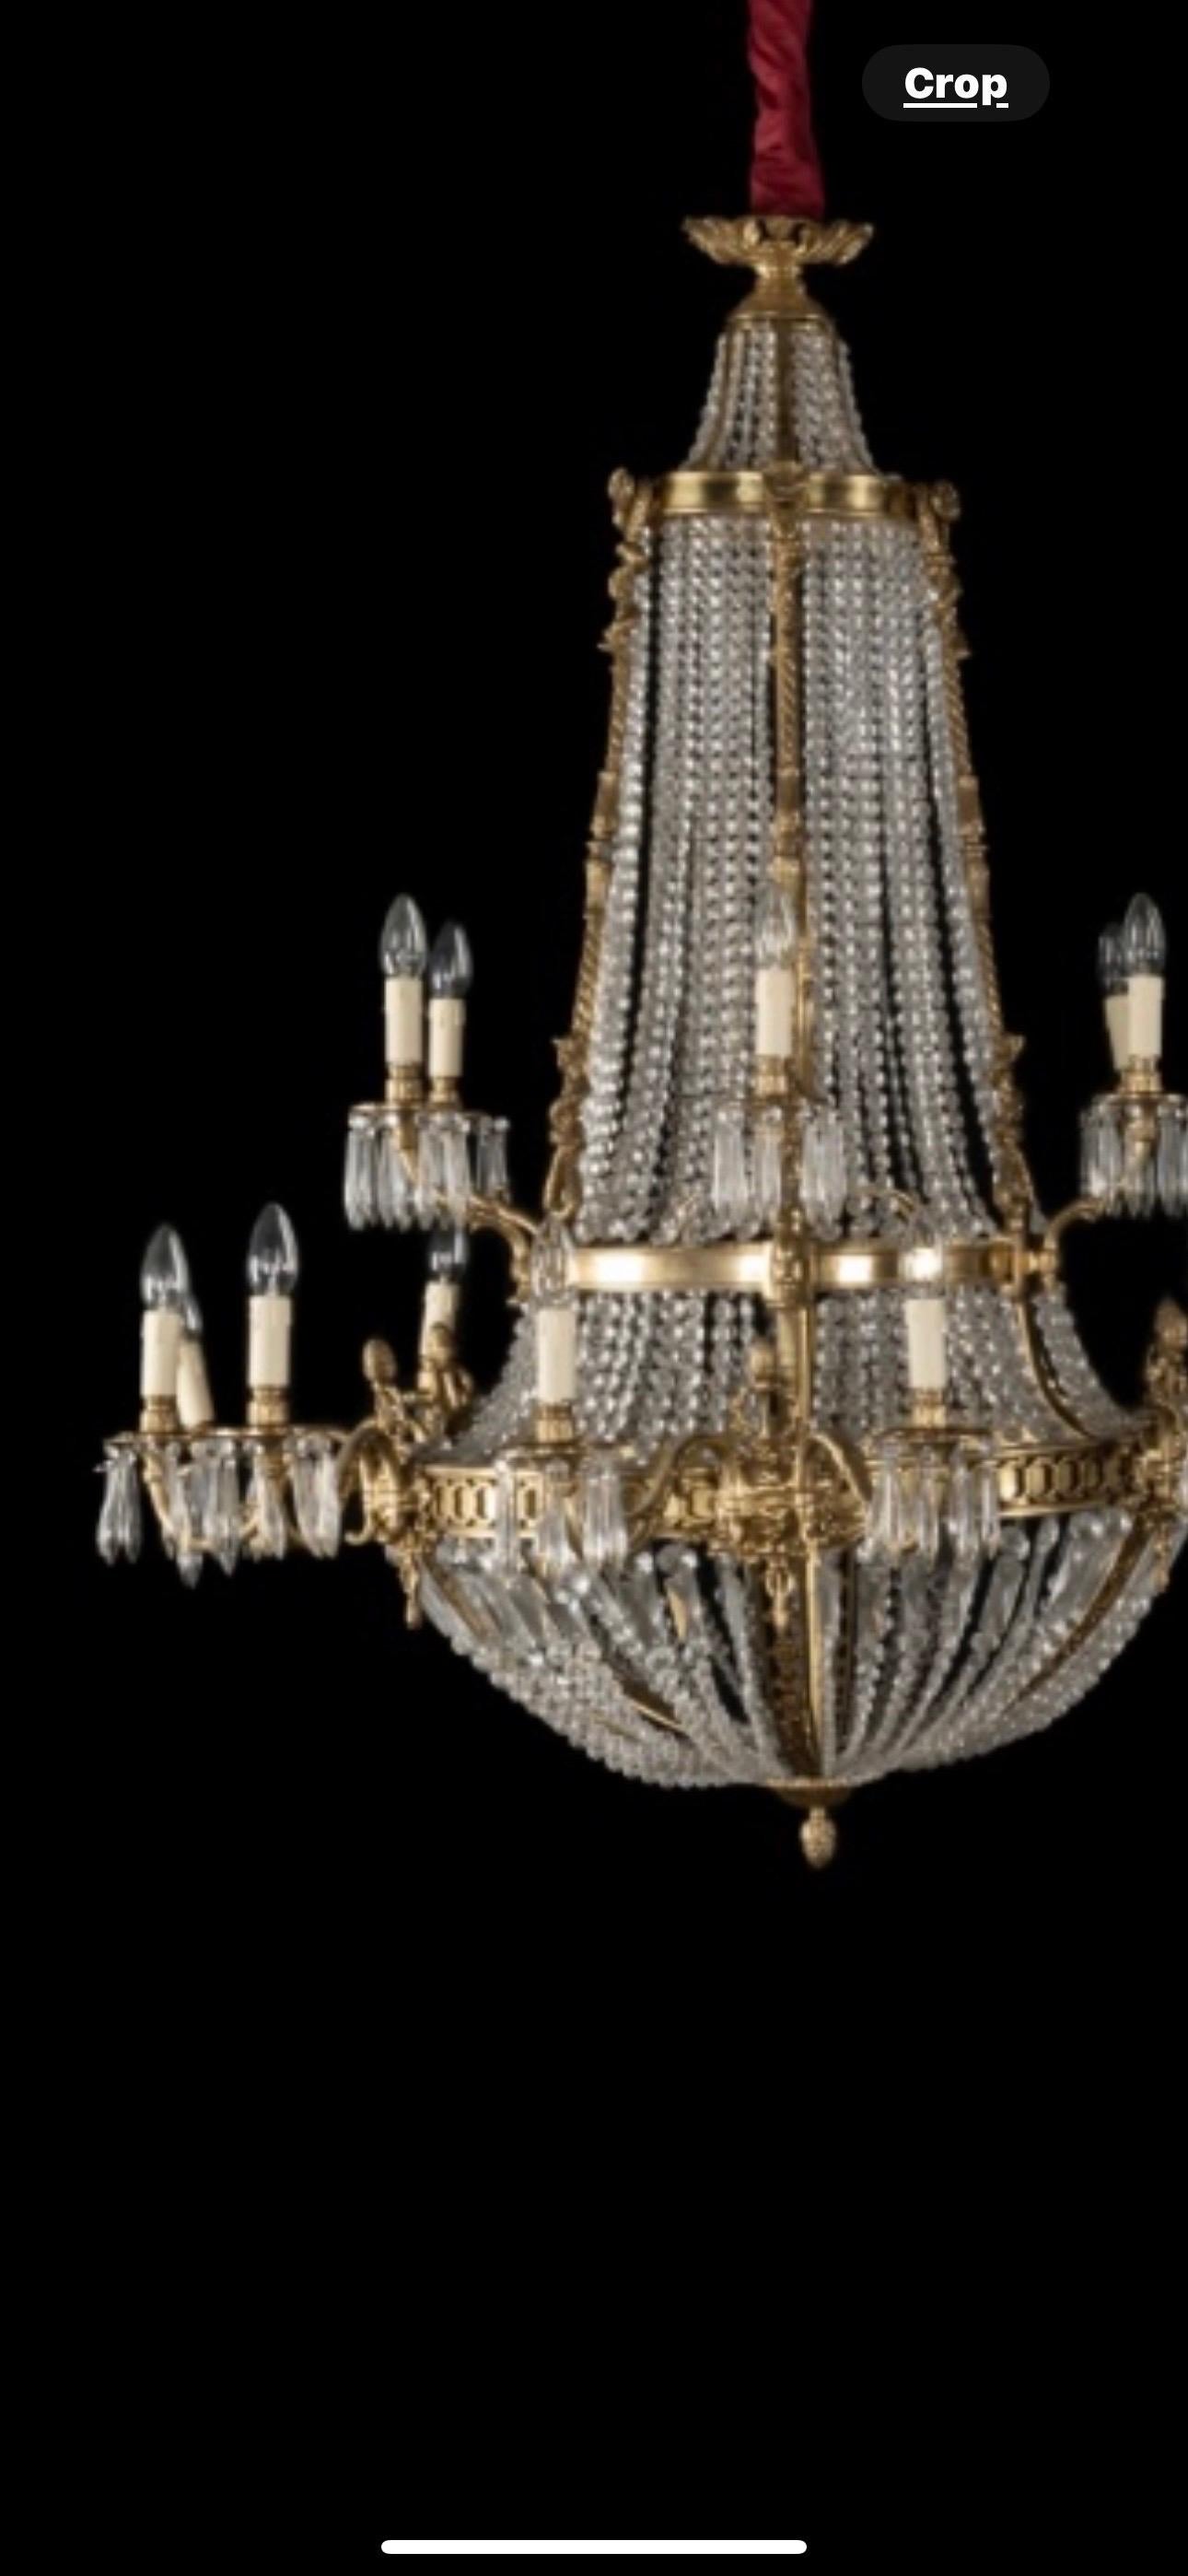 20th Century Rare opportunity, 20thC French empire chandeliers from TV show THE CROWN For Sale